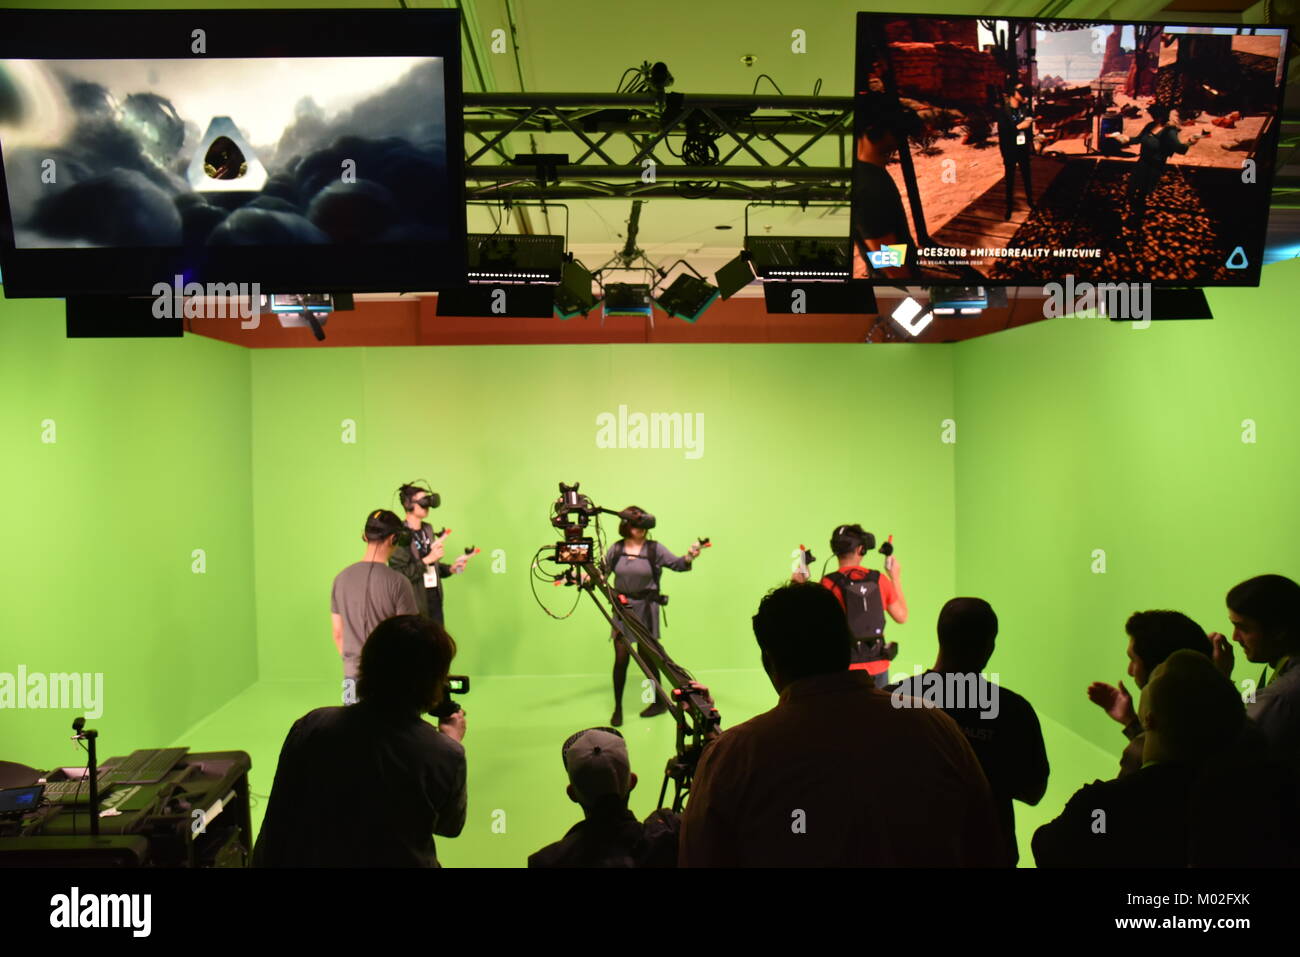 Mixed Reality - Virtual Reality demo in green screen room of HTC Vive at CES (Consumer Electronics Show), world’s largest trade show, in Las Vegas, N Stock Photo